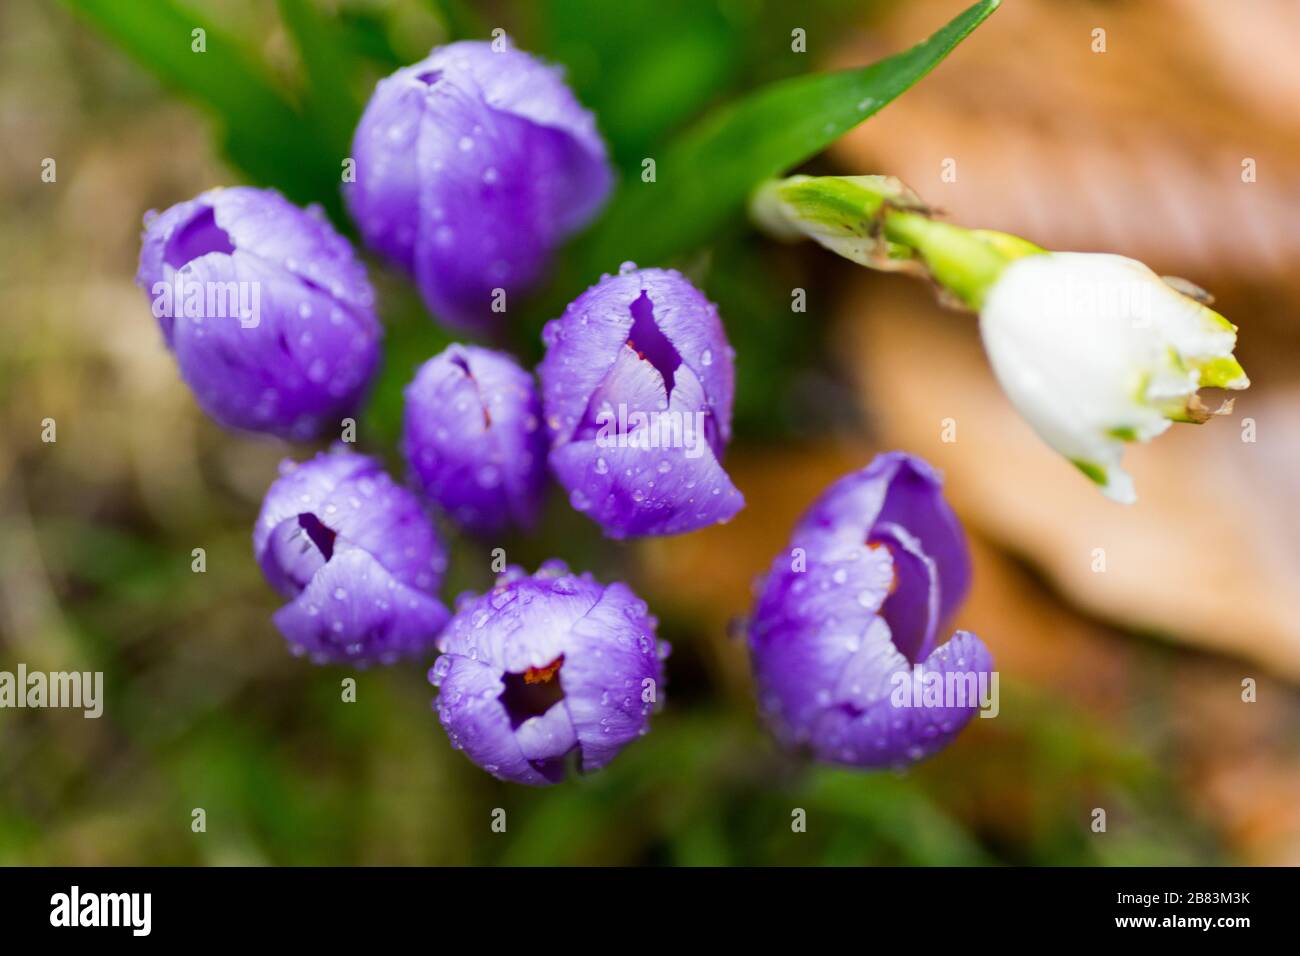 Detail of crocus flowers with blurred background. Narrow depth of field. Stock Photo